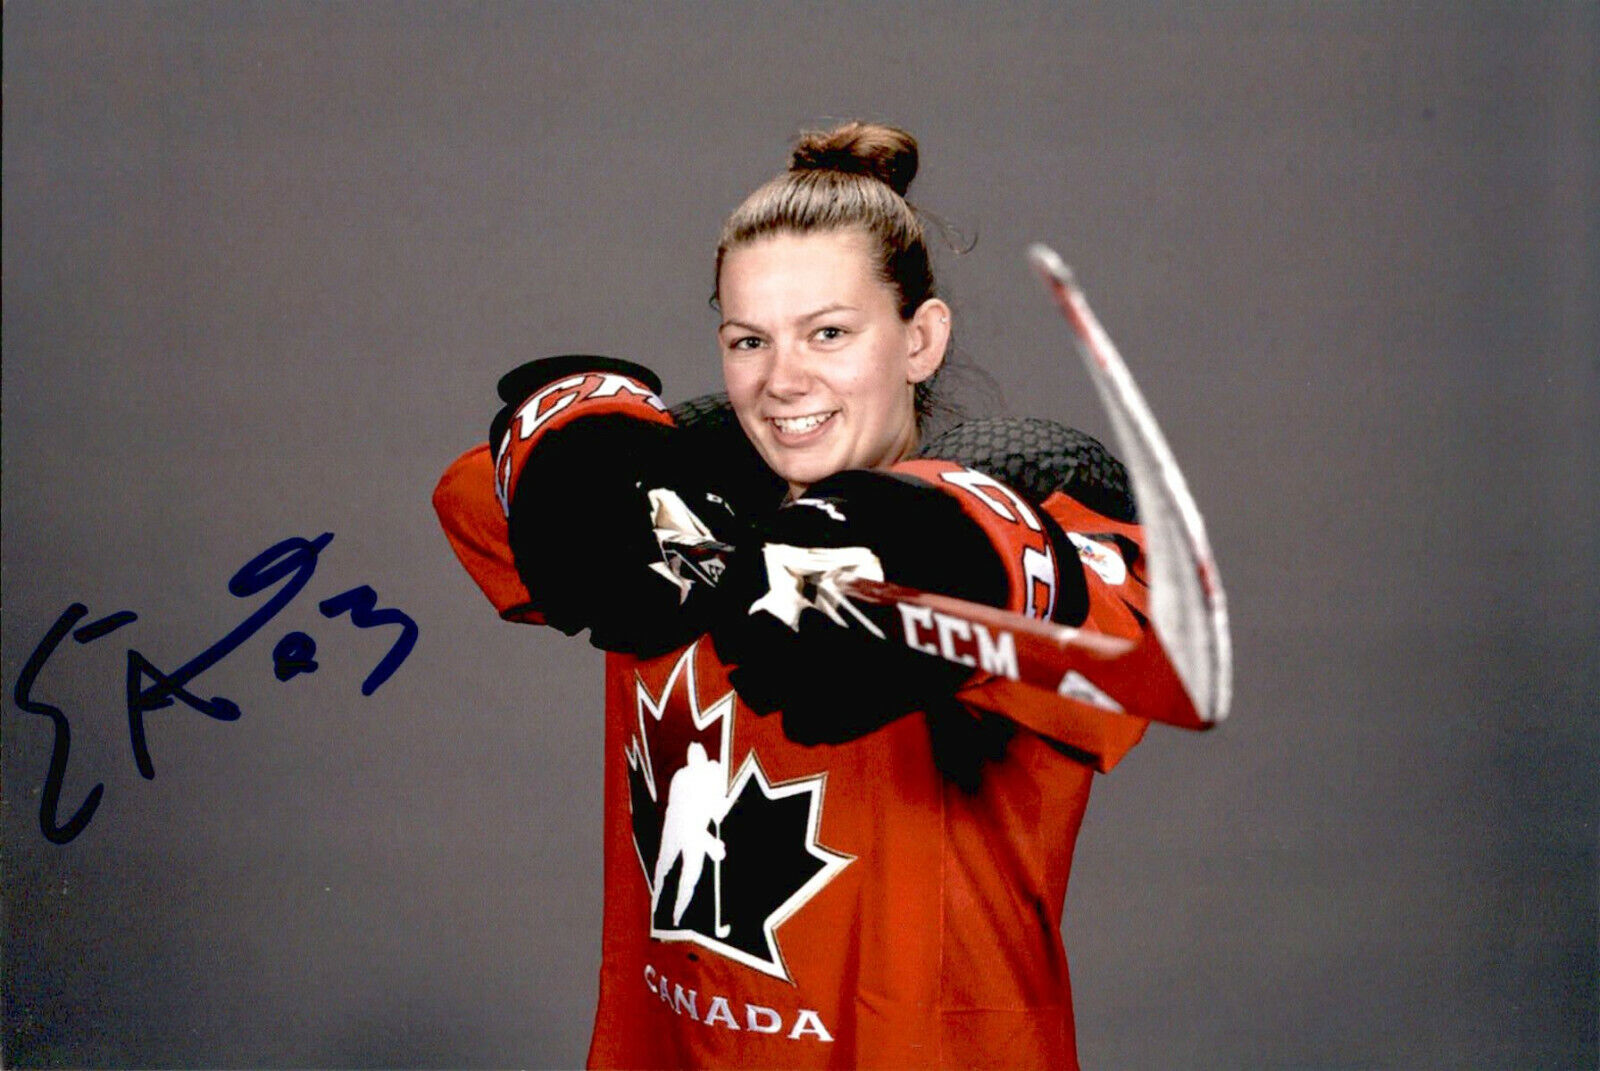 Erin Ambrose SIGNED 4x6 Photo Poster painting WOMEN'S HOCKEY / TEAM CANADA